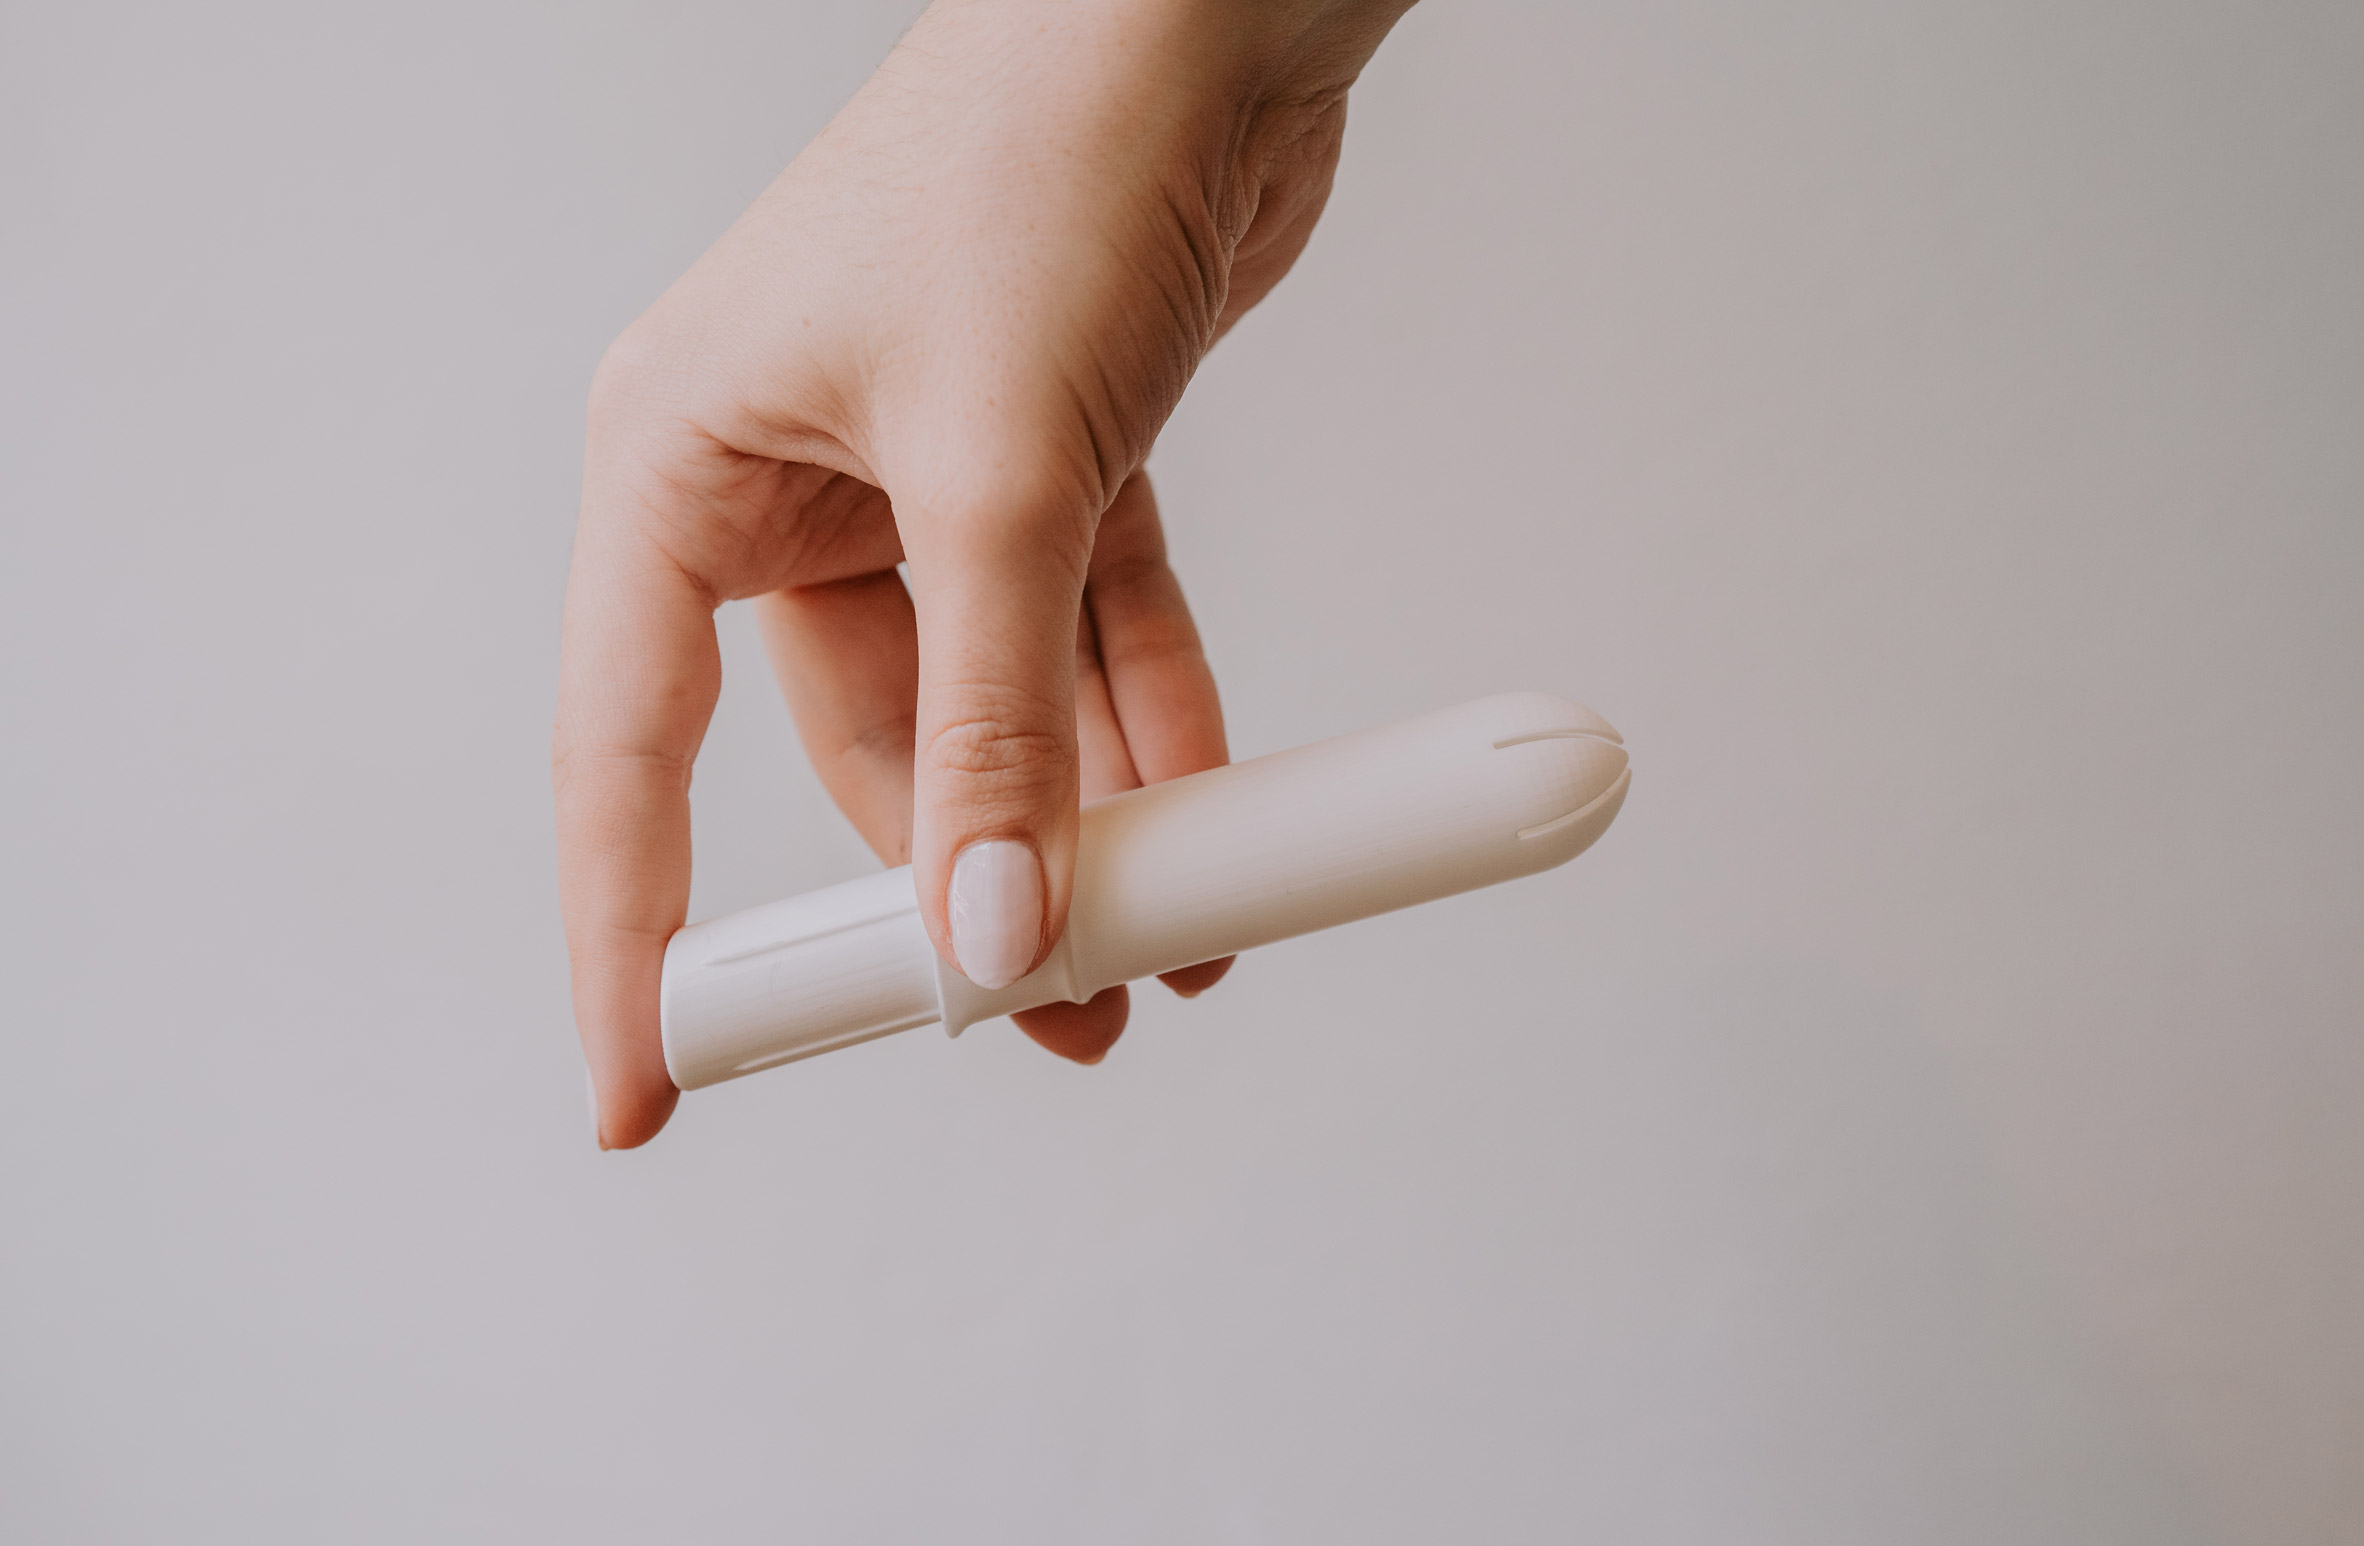 Tampon-style applicator